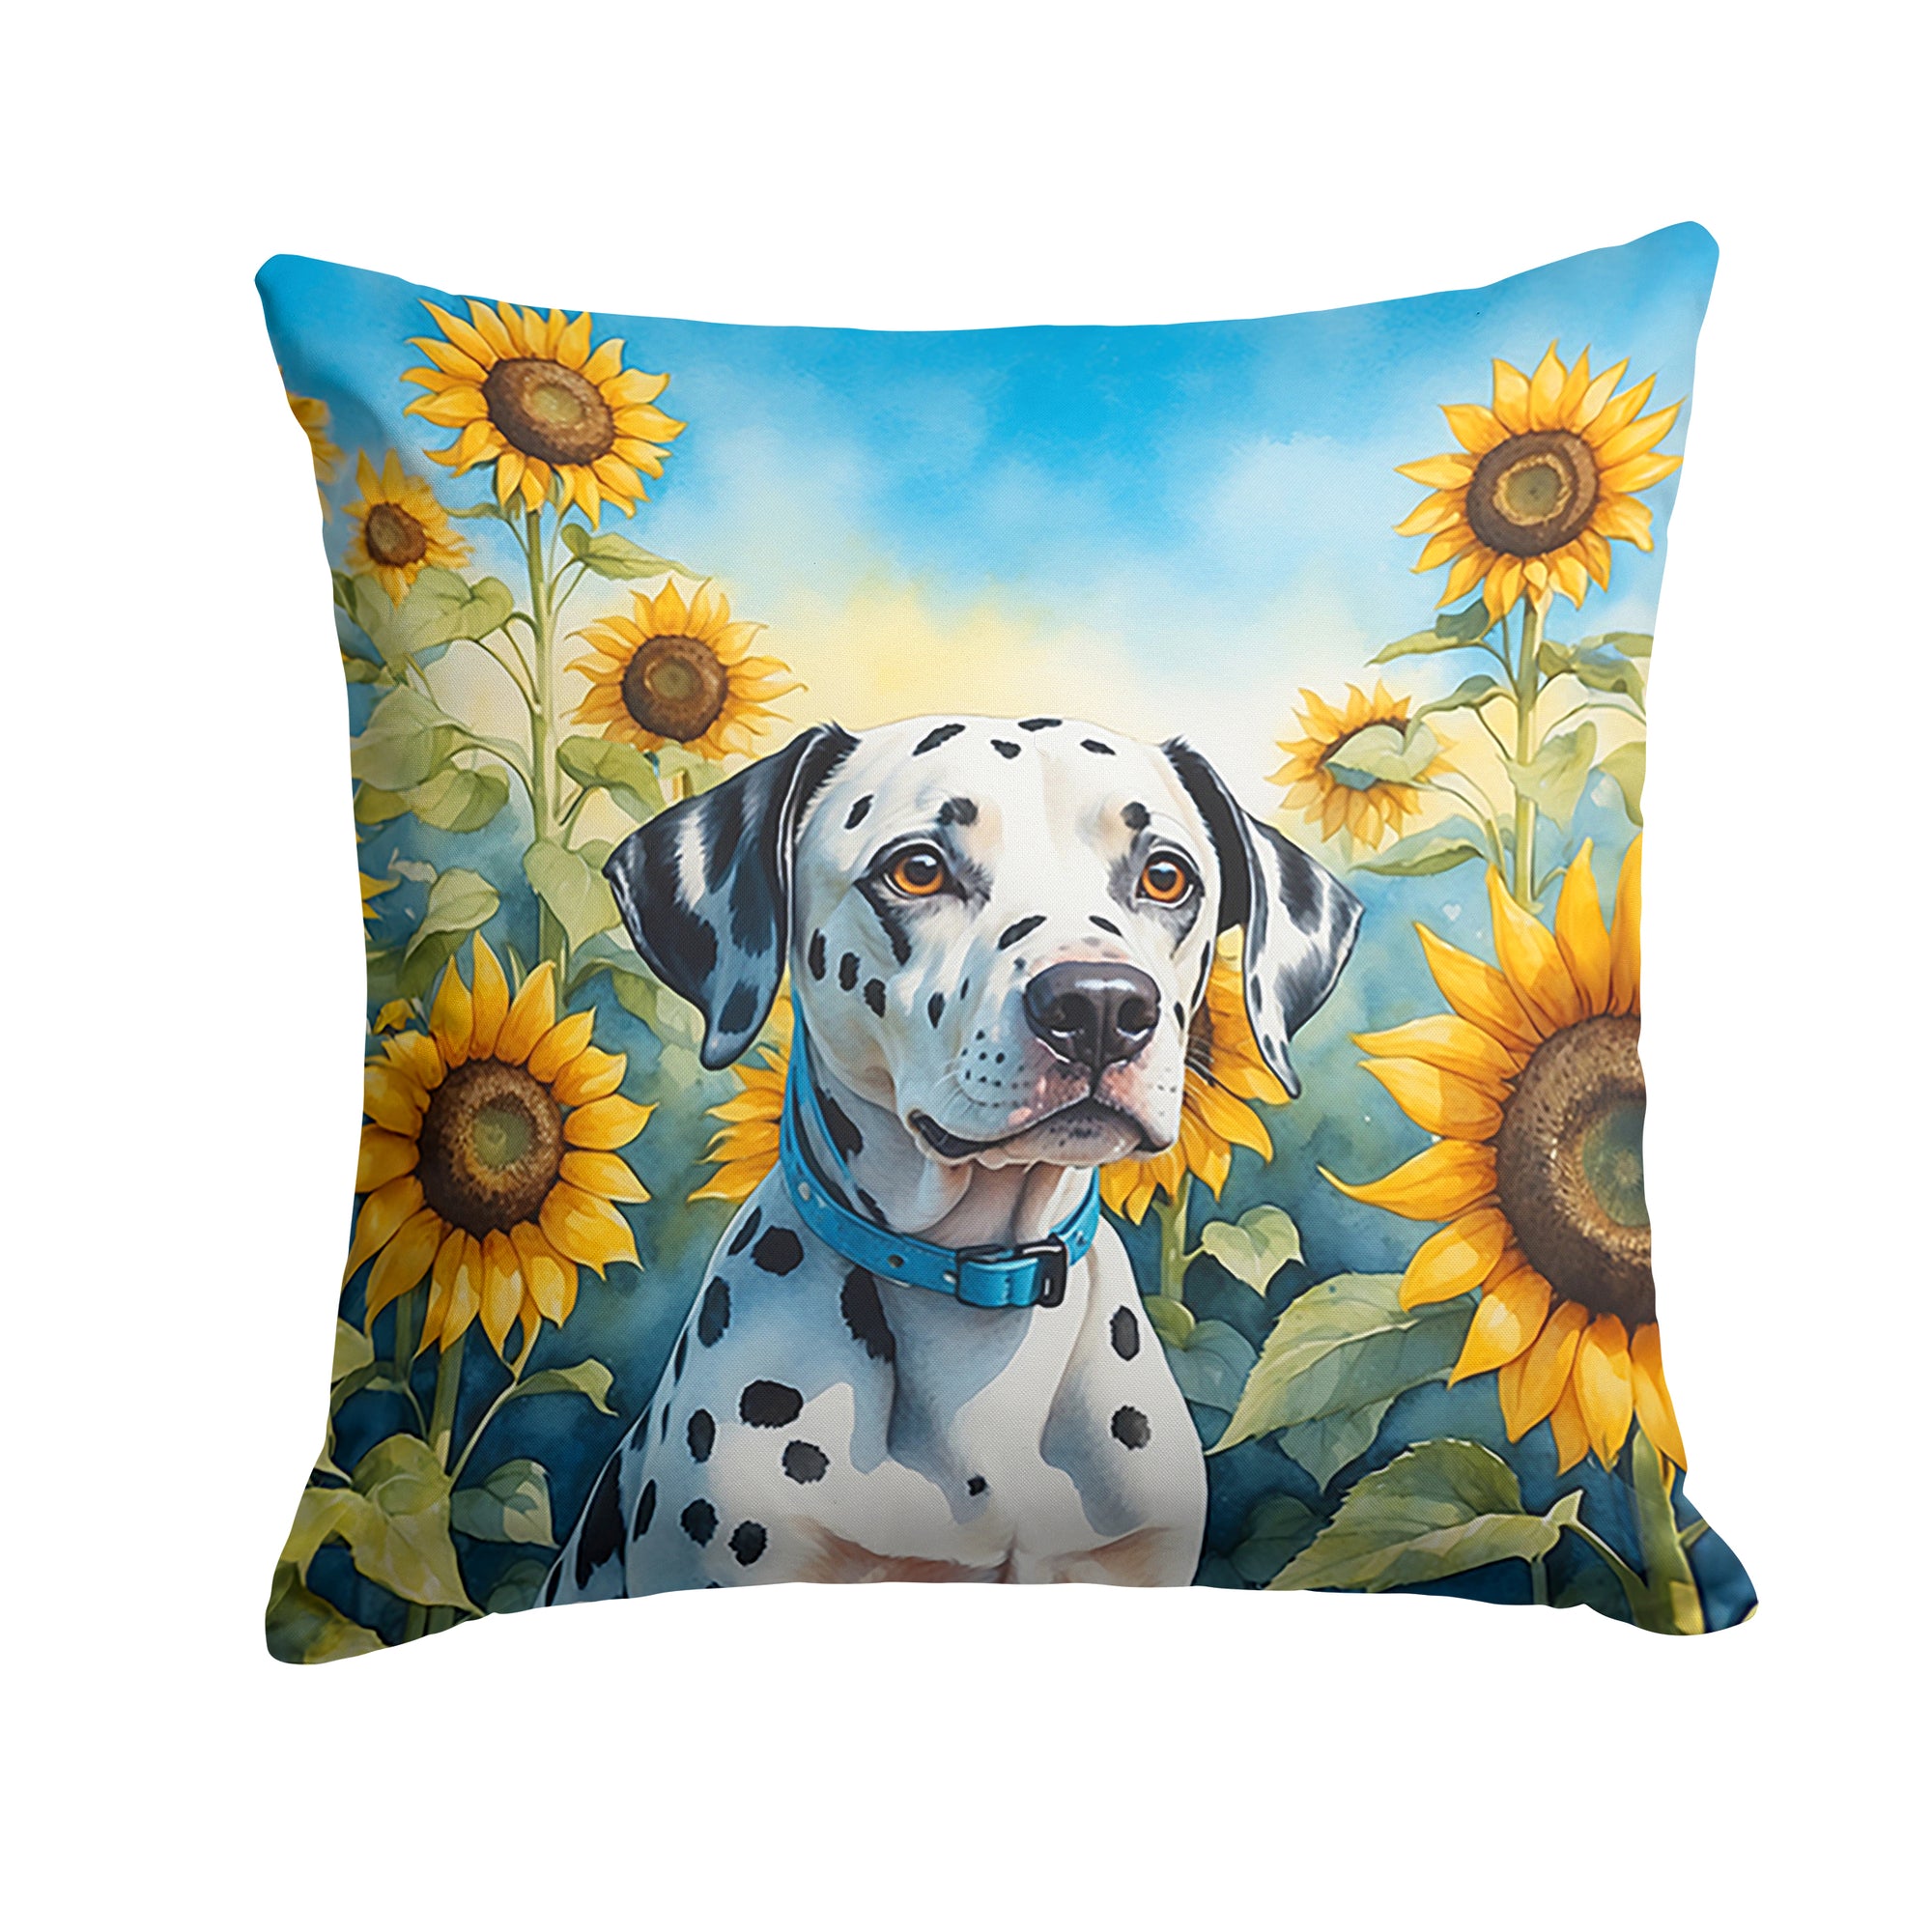 Buy this Dalmatian in Sunflowers Throw Pillow